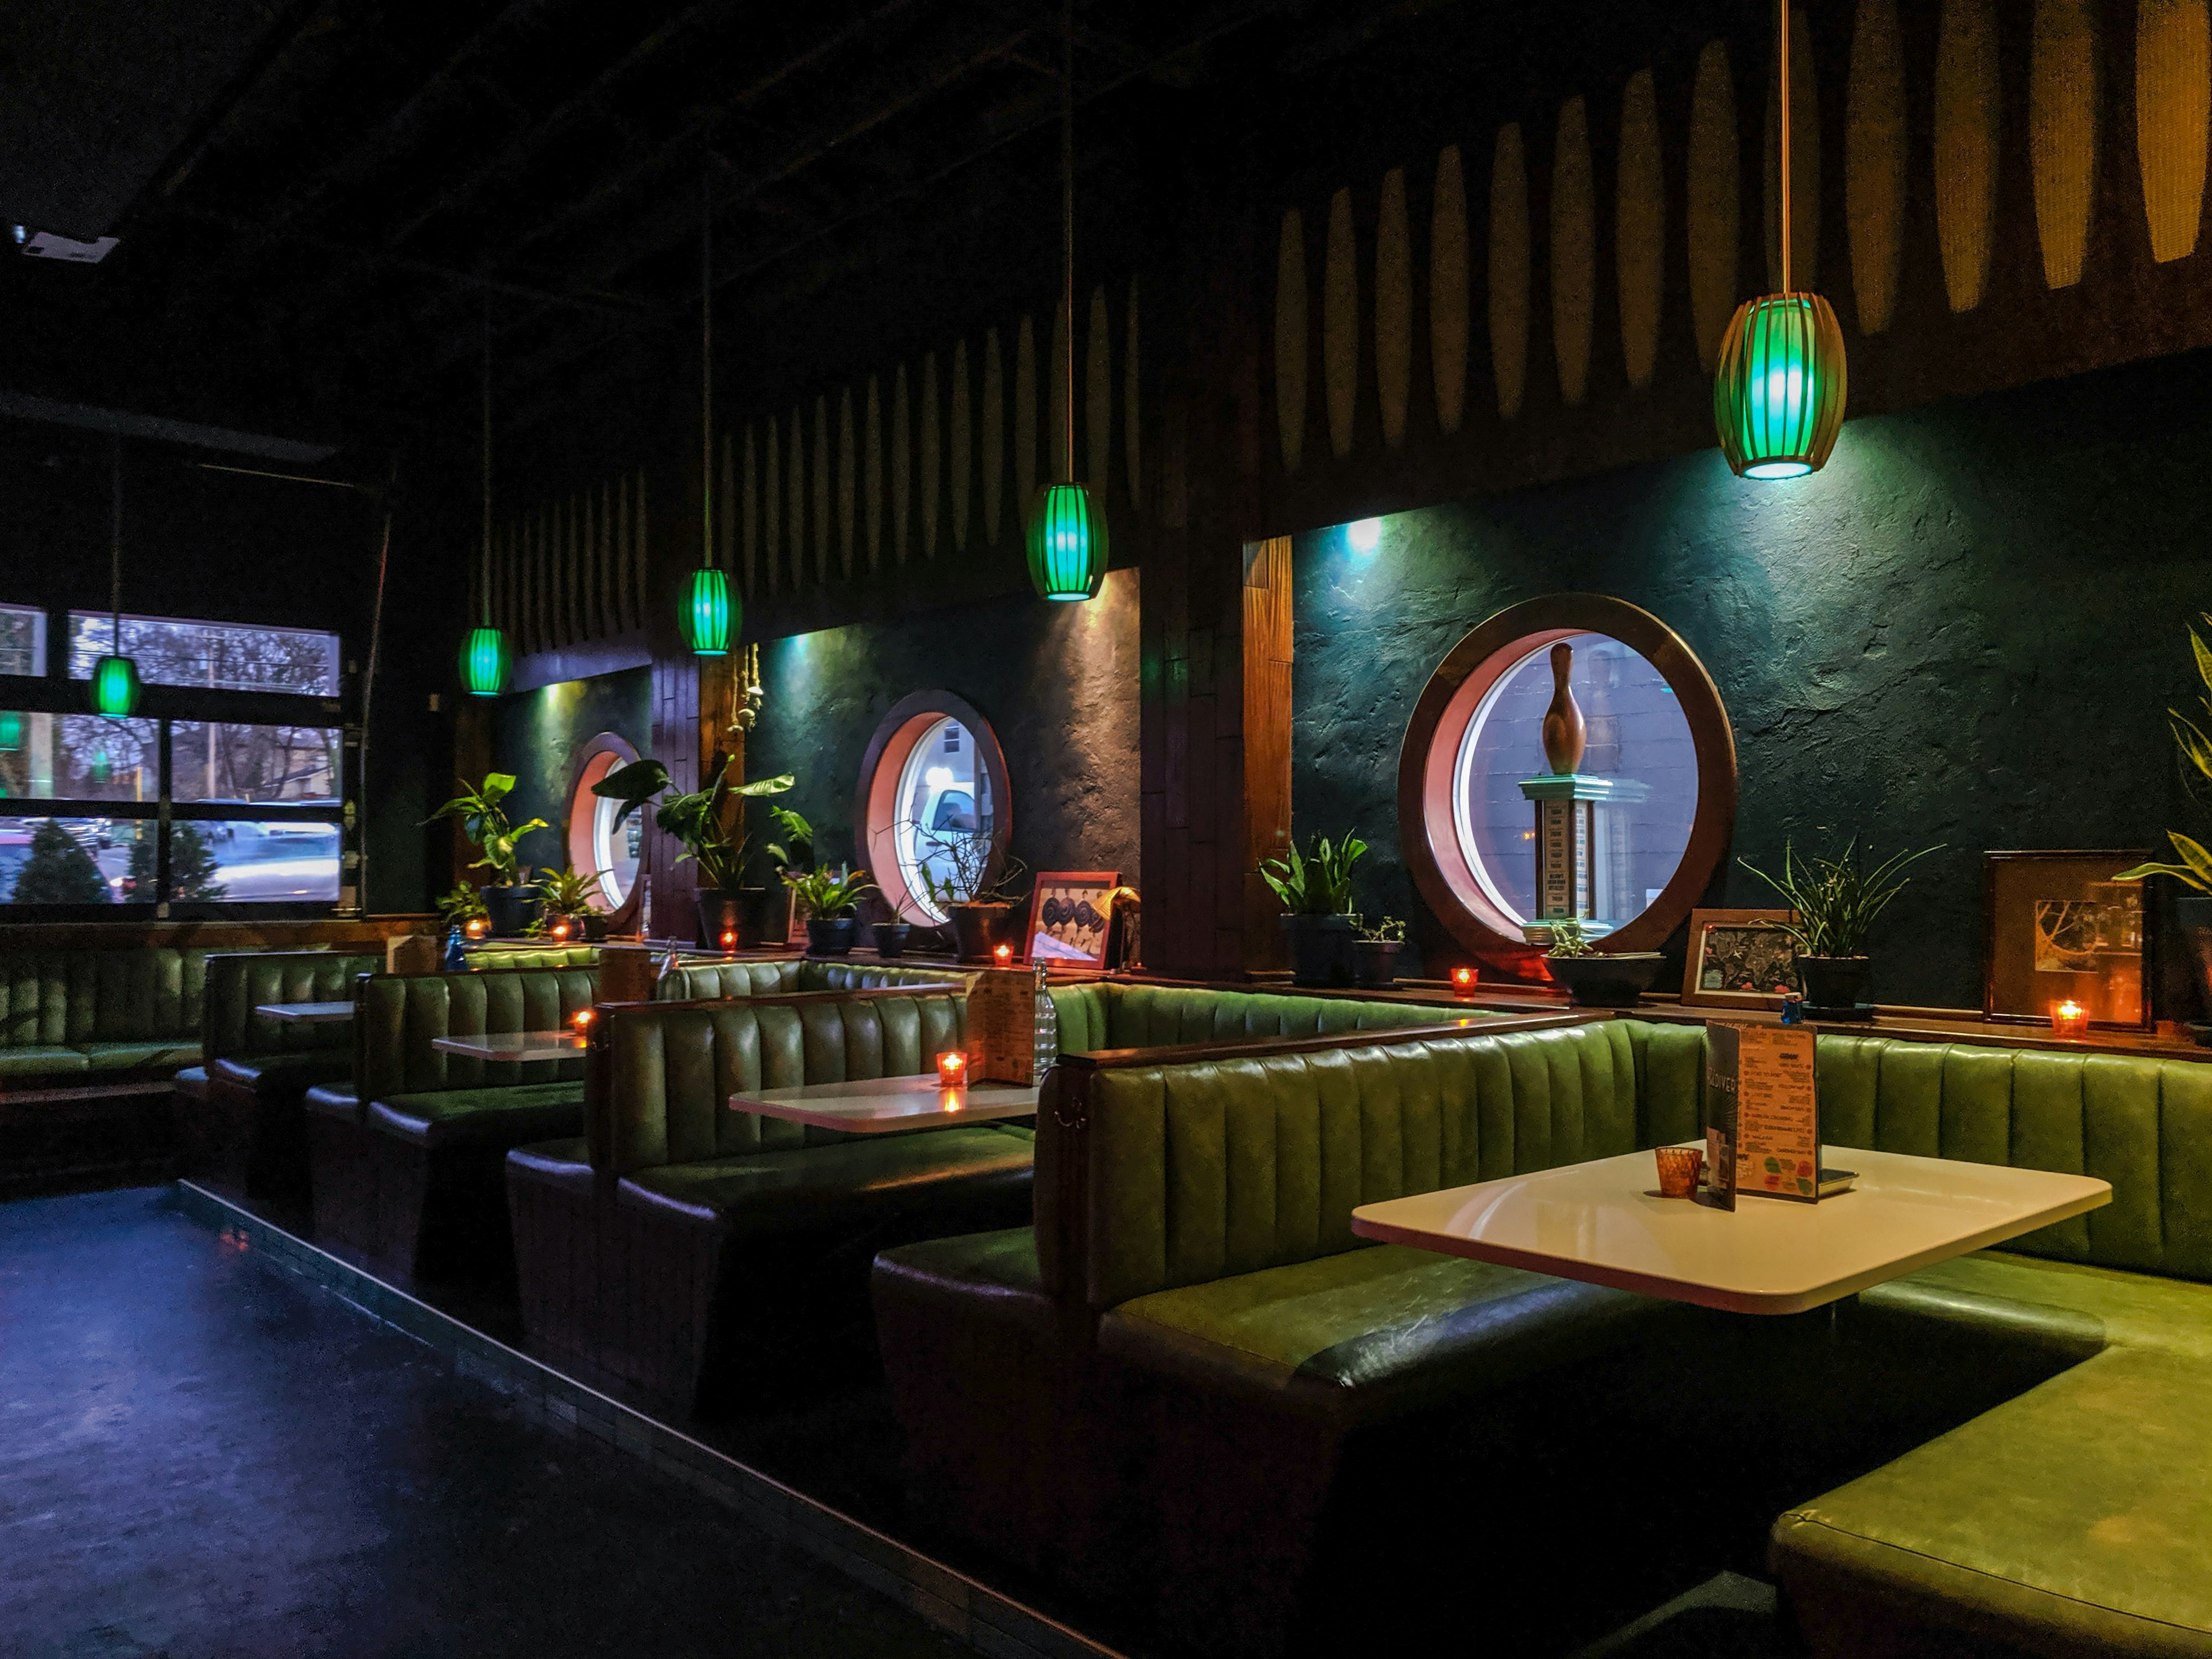 The dark, emerald green-tinted interior of Pearl Diver in Nashville, Tennessee features midcentury green naugahyde U-shaped booths against a hunter green plaster wall punctuated by porthole windows filled with bowling trophies and the like. Over the booths are hanging lamps in bottle-green glass shades. Live plants sit on a deep sill by the windows 